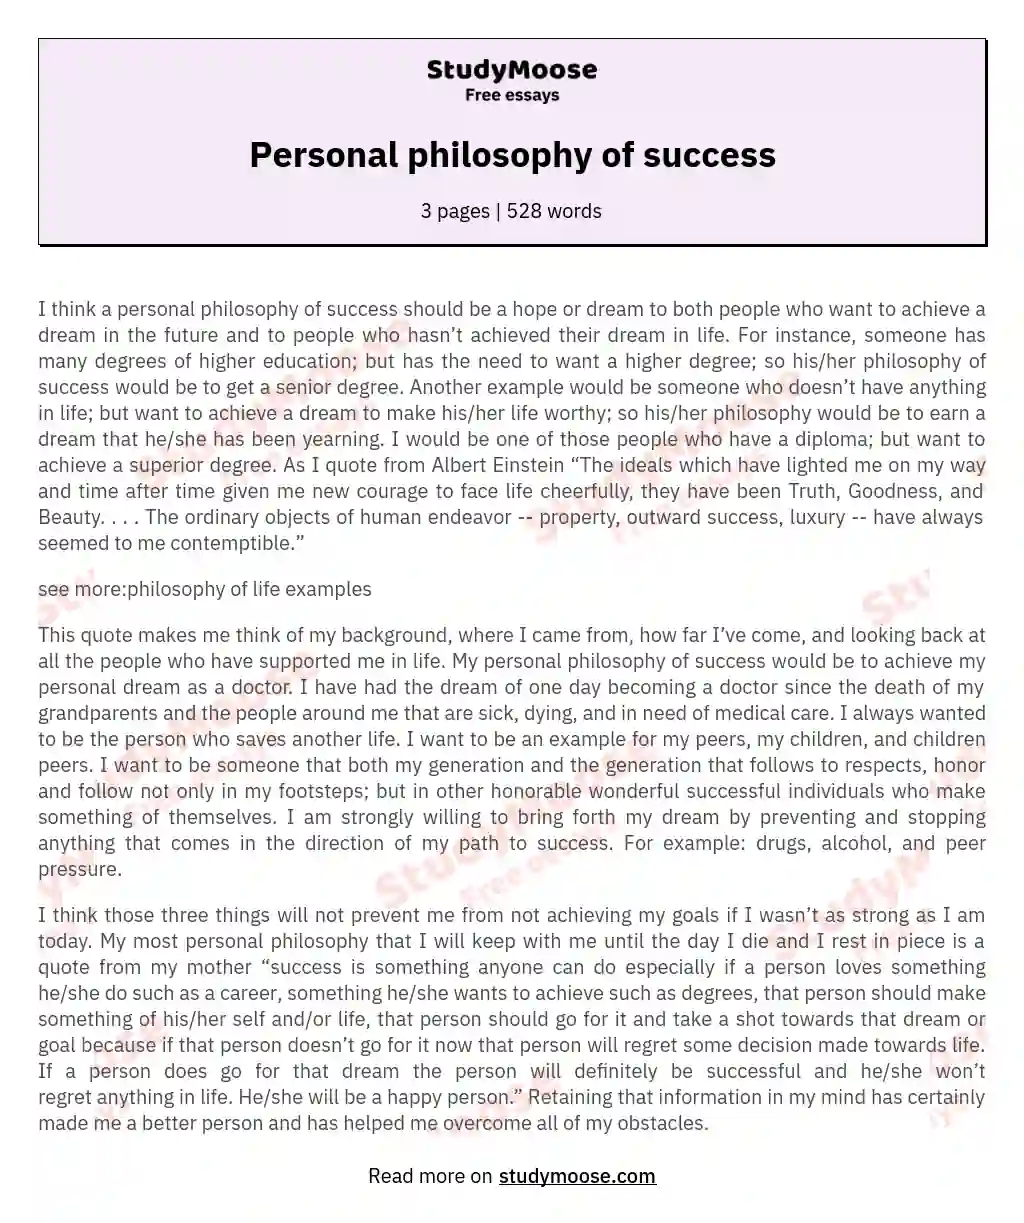 Personal philosophy of success essay